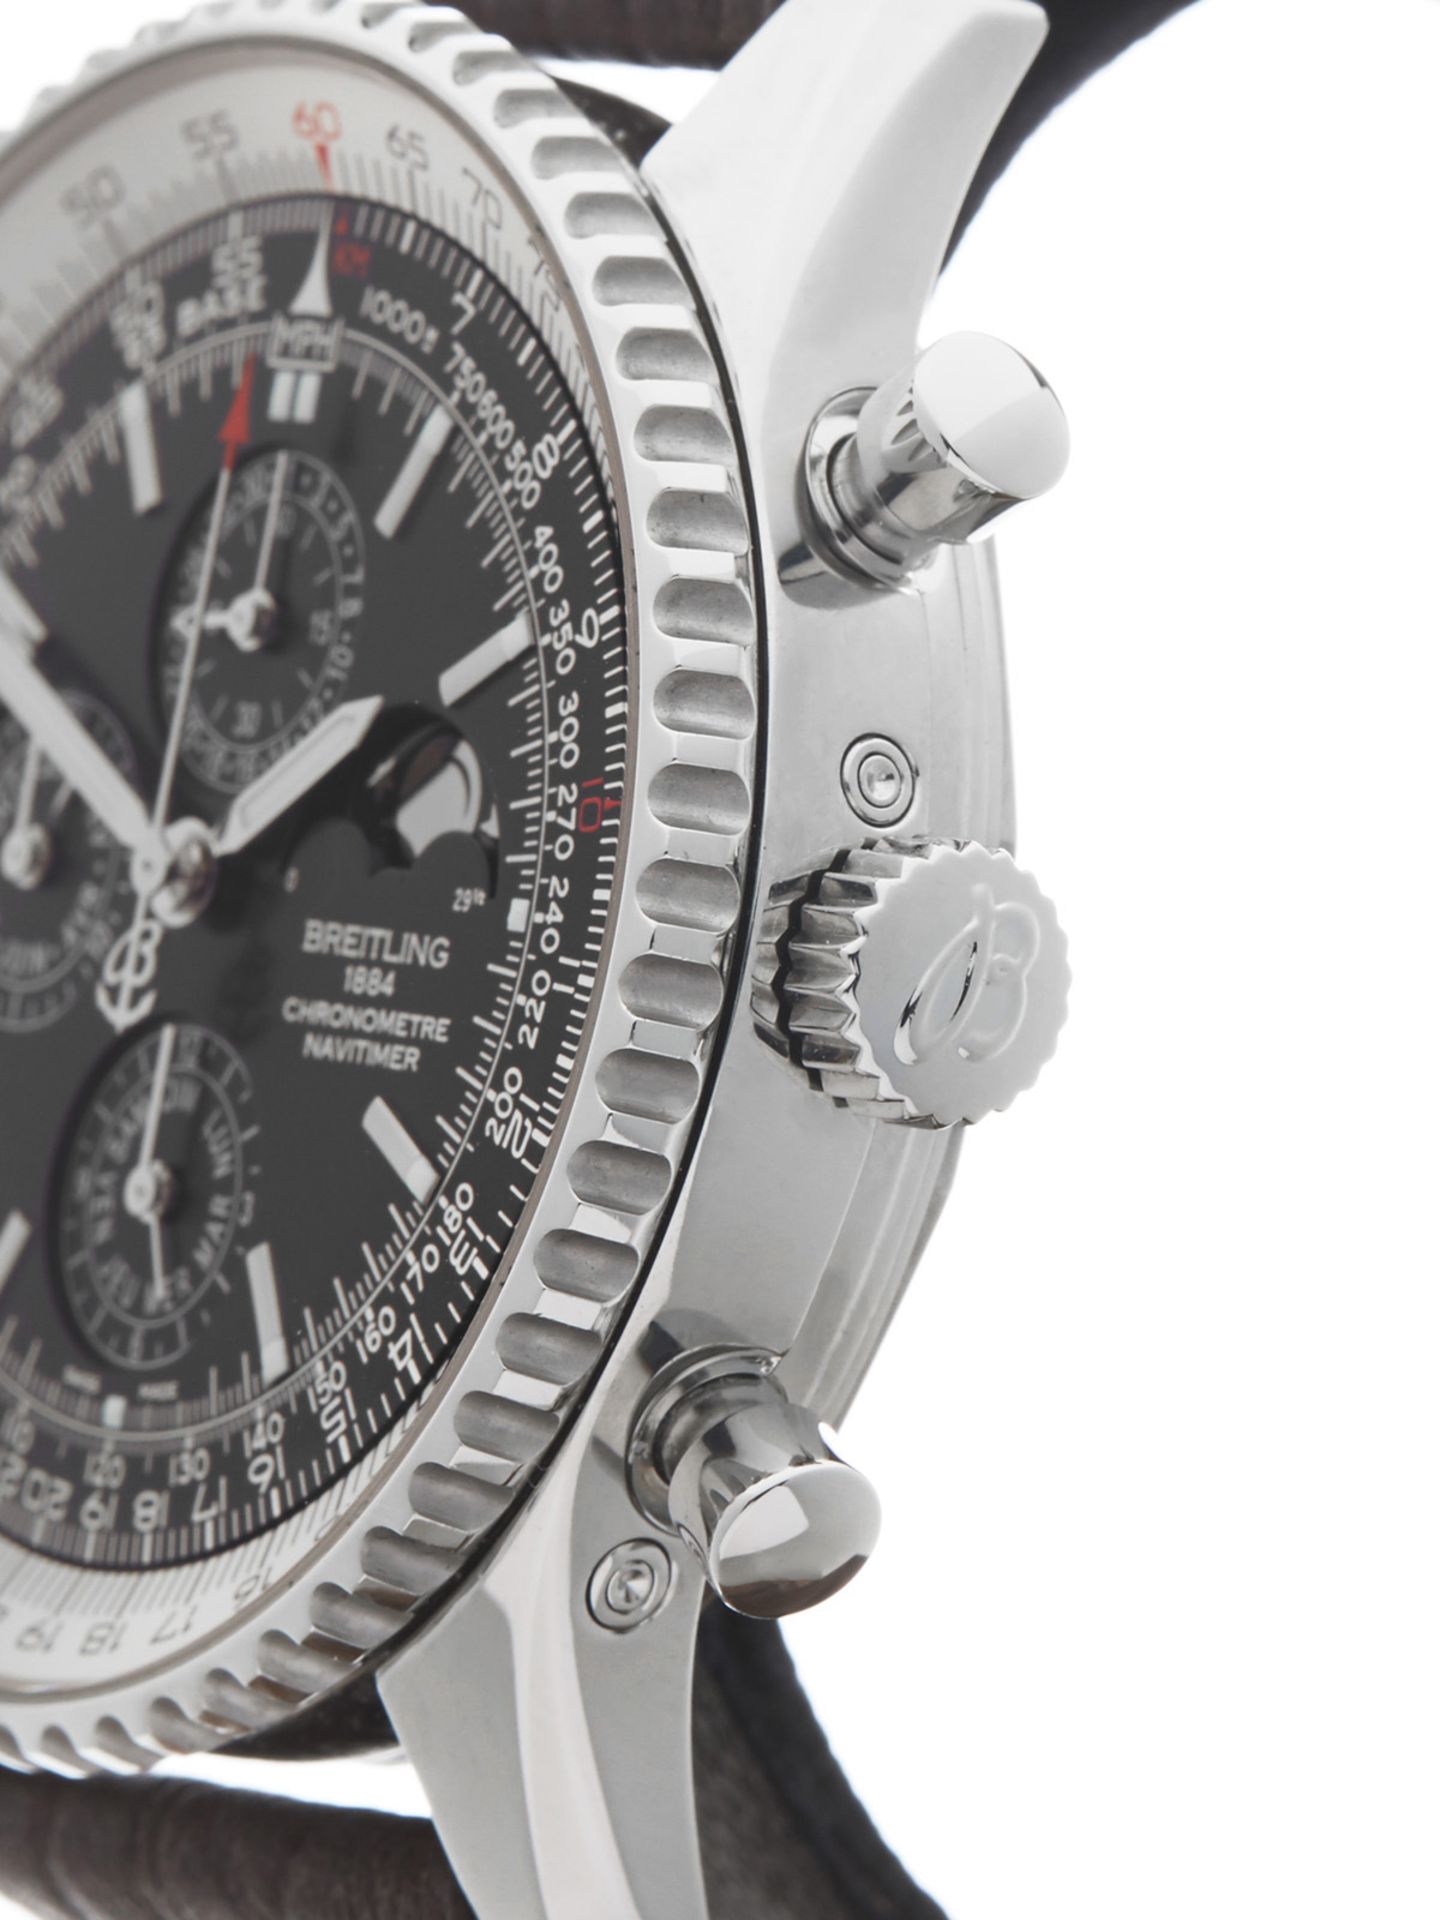 Breitling Navitimer Chronograph 46mm Stainless Steel A19370 - Image 4 of 9